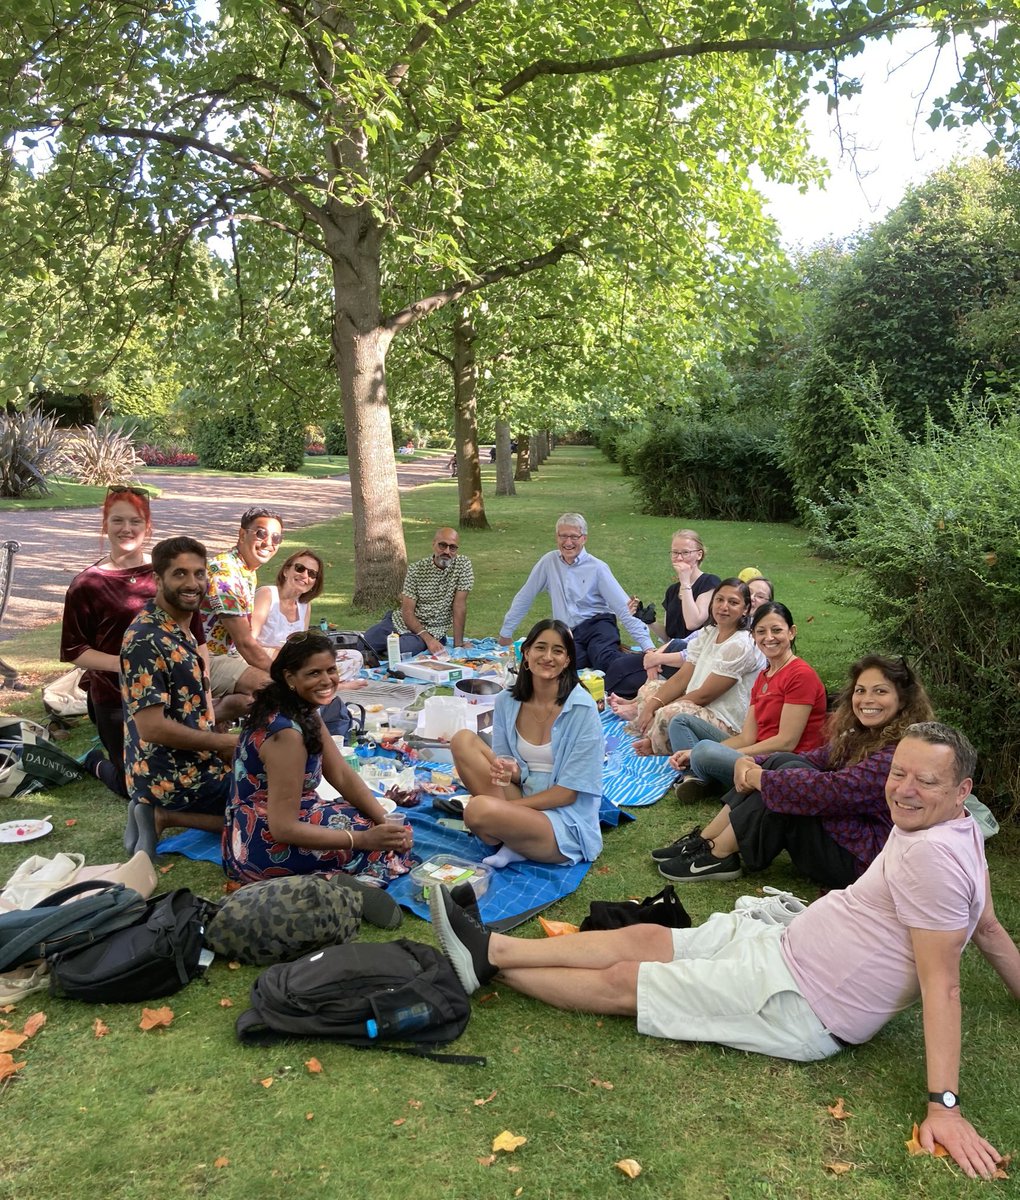 Calling all IMT3s/GUM ST4 trainees: @UCL_CRISH will be advertising a NIHR ACF for HIV/GUM in October. It's a wonderful research team (see summer picnic below!) - feel free to DM or email me MMC / CRISH ACF alumni include: me, @manik_psk @VoraNina @BintyRock @diarmuid_nugent